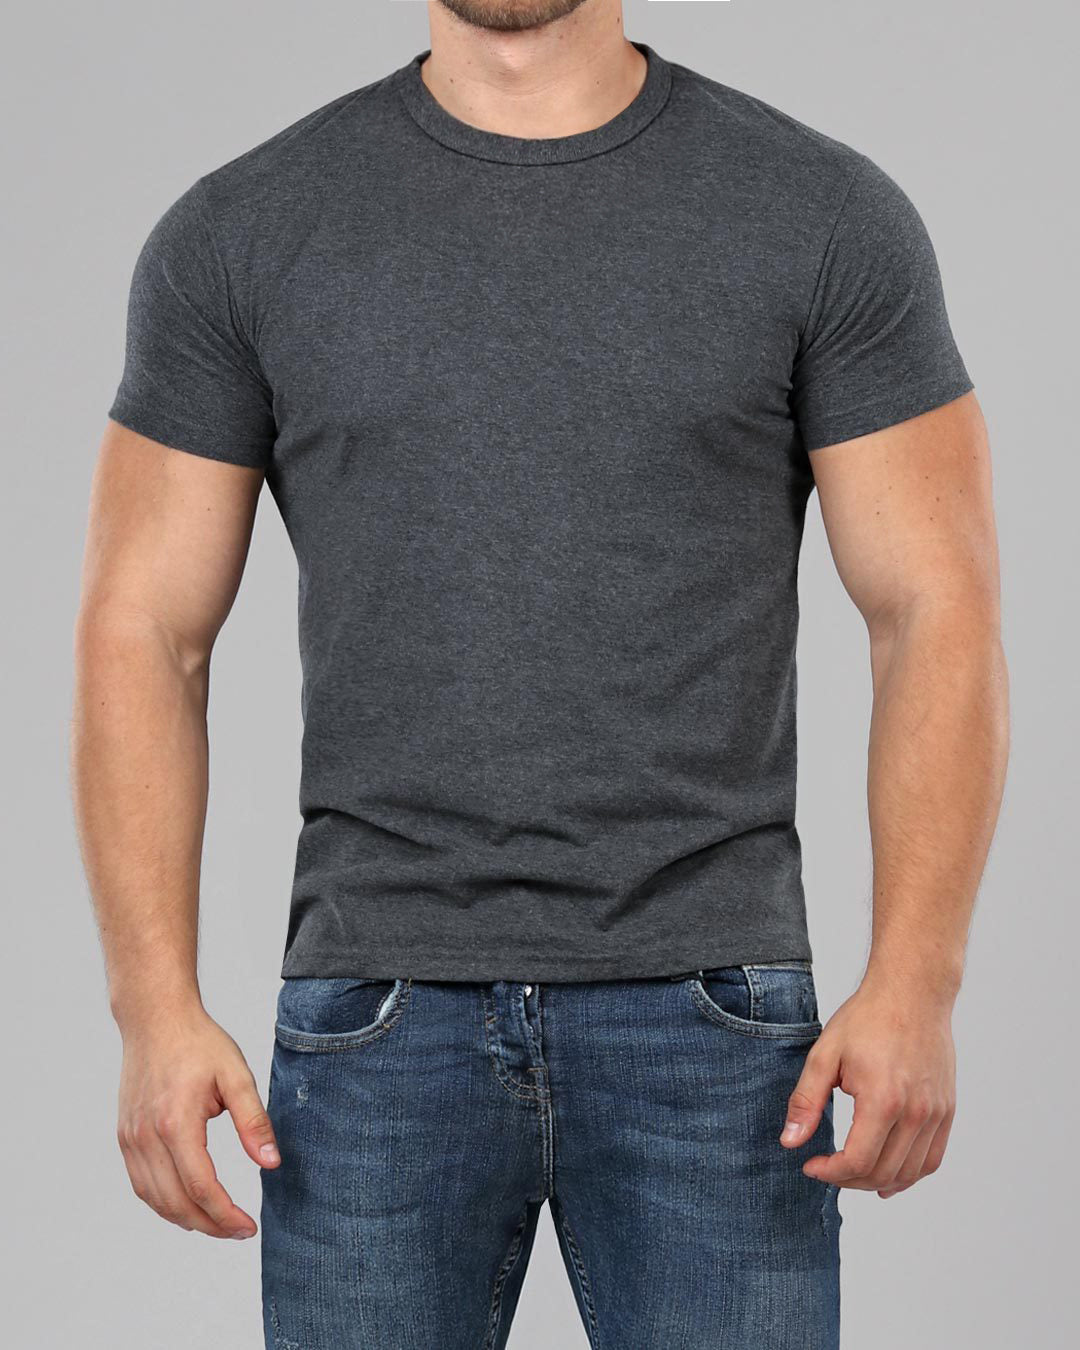 Men's Dark Grey Crew Neck Fitted Plain T-Shirt | Muscle Fit Basics